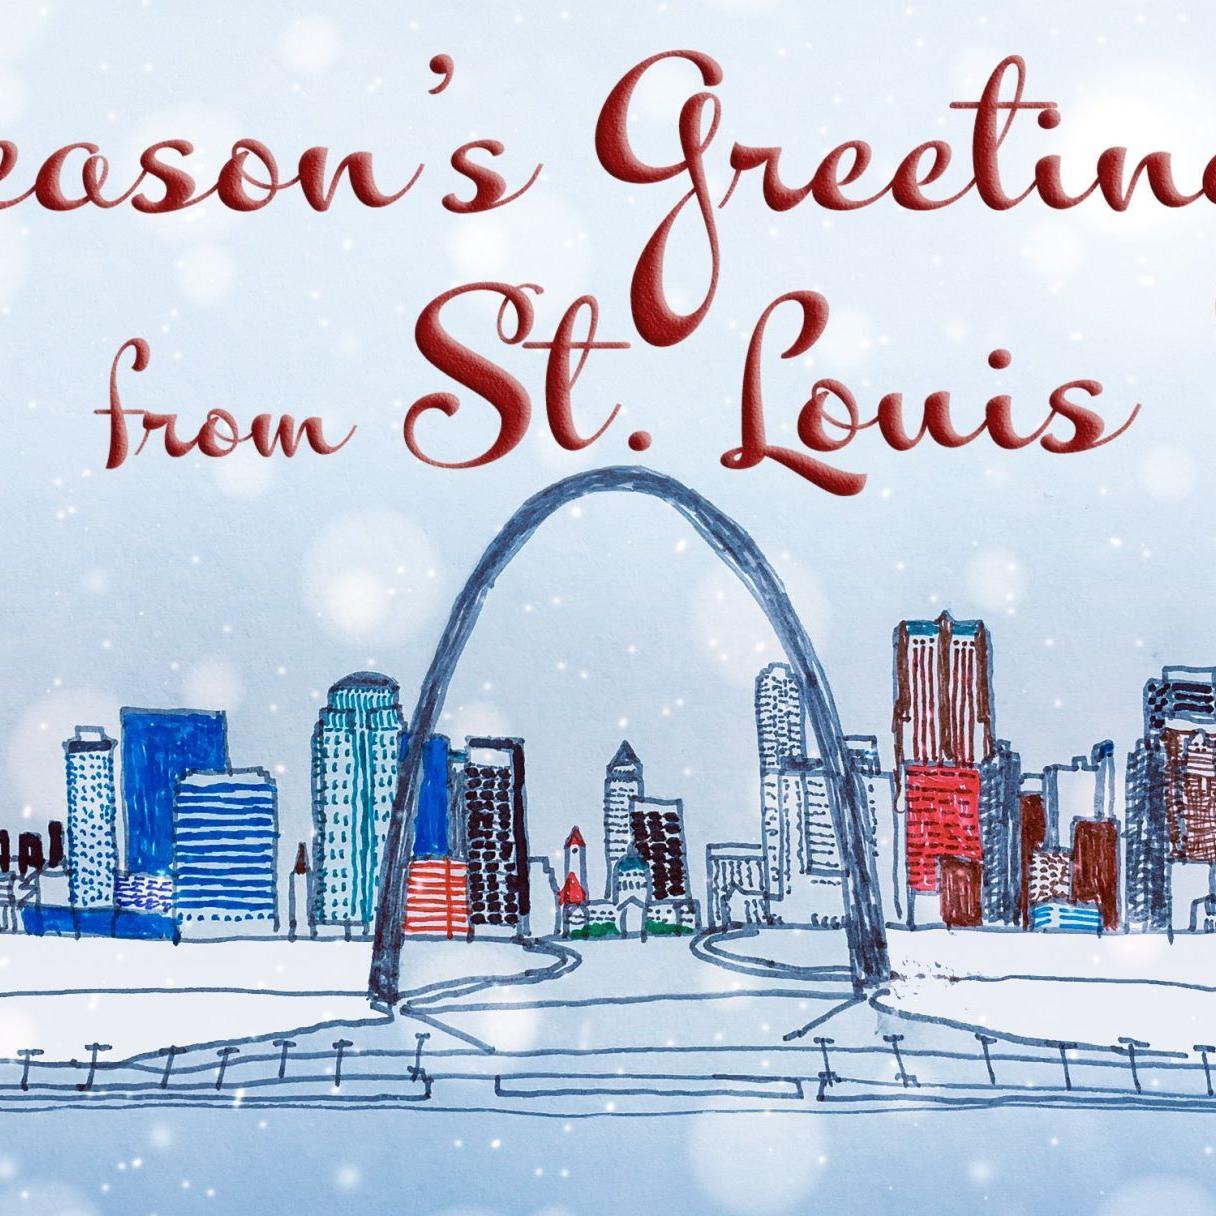 Christmas Cards Benefiting A Charity St Louis 2021